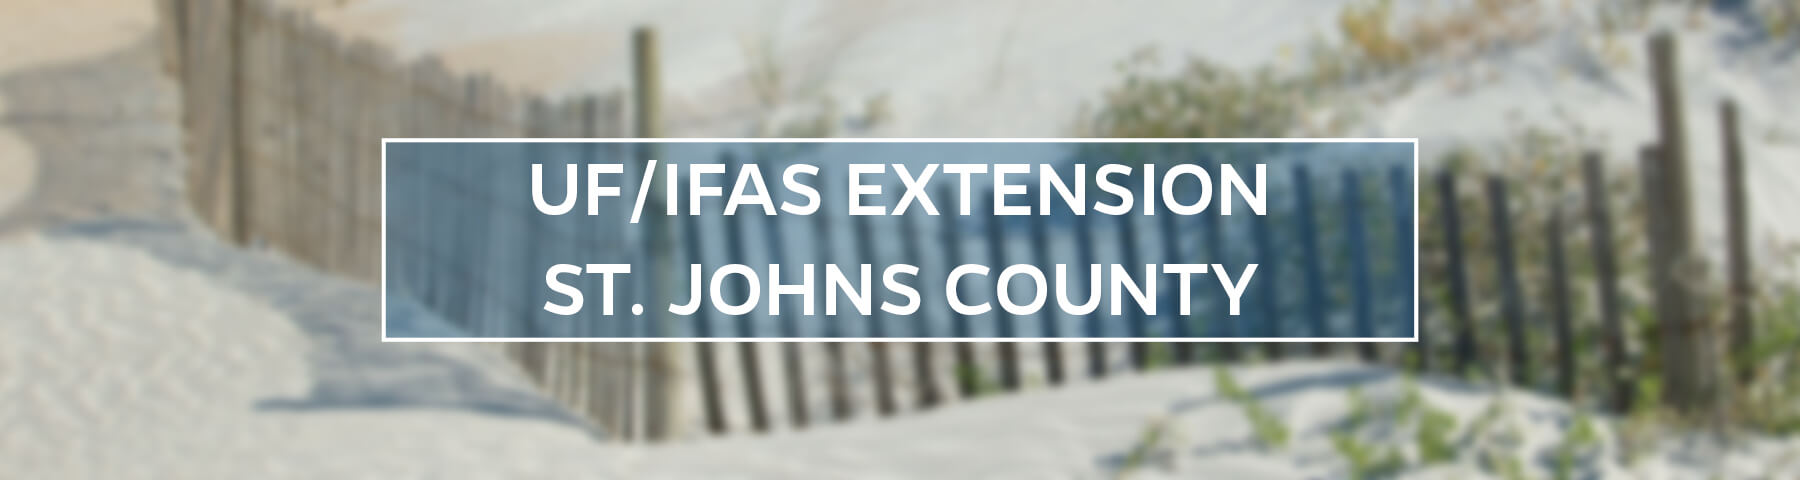 UF/IFAS Extension St. Johns County